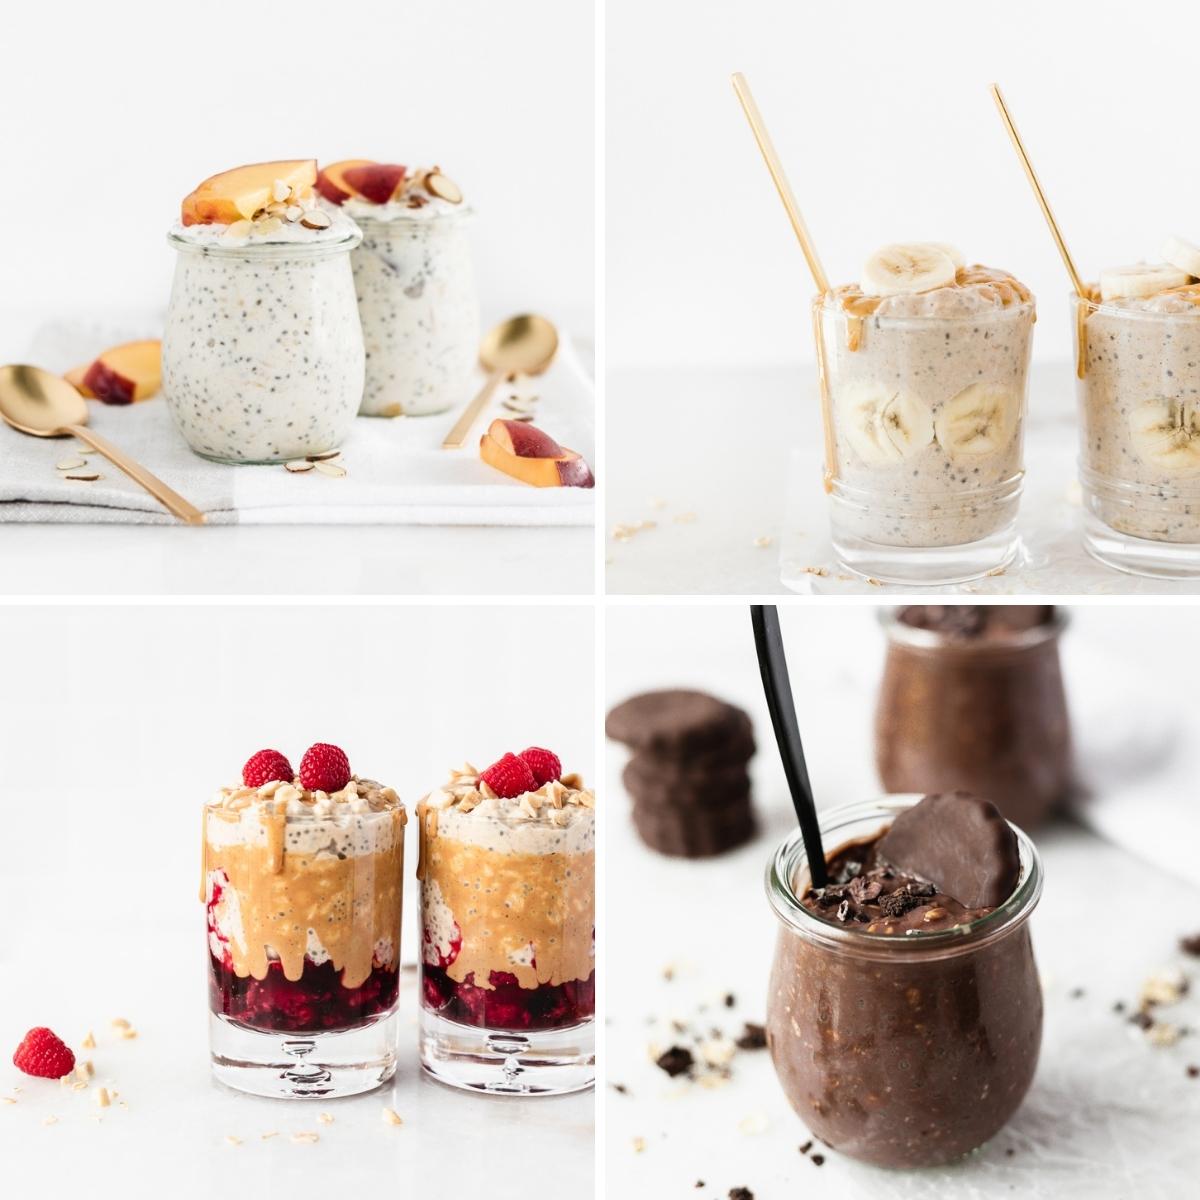 https://livelytable.com/wp-content/uploads/2020/03/overnight-oats-out-of-anything.jpg